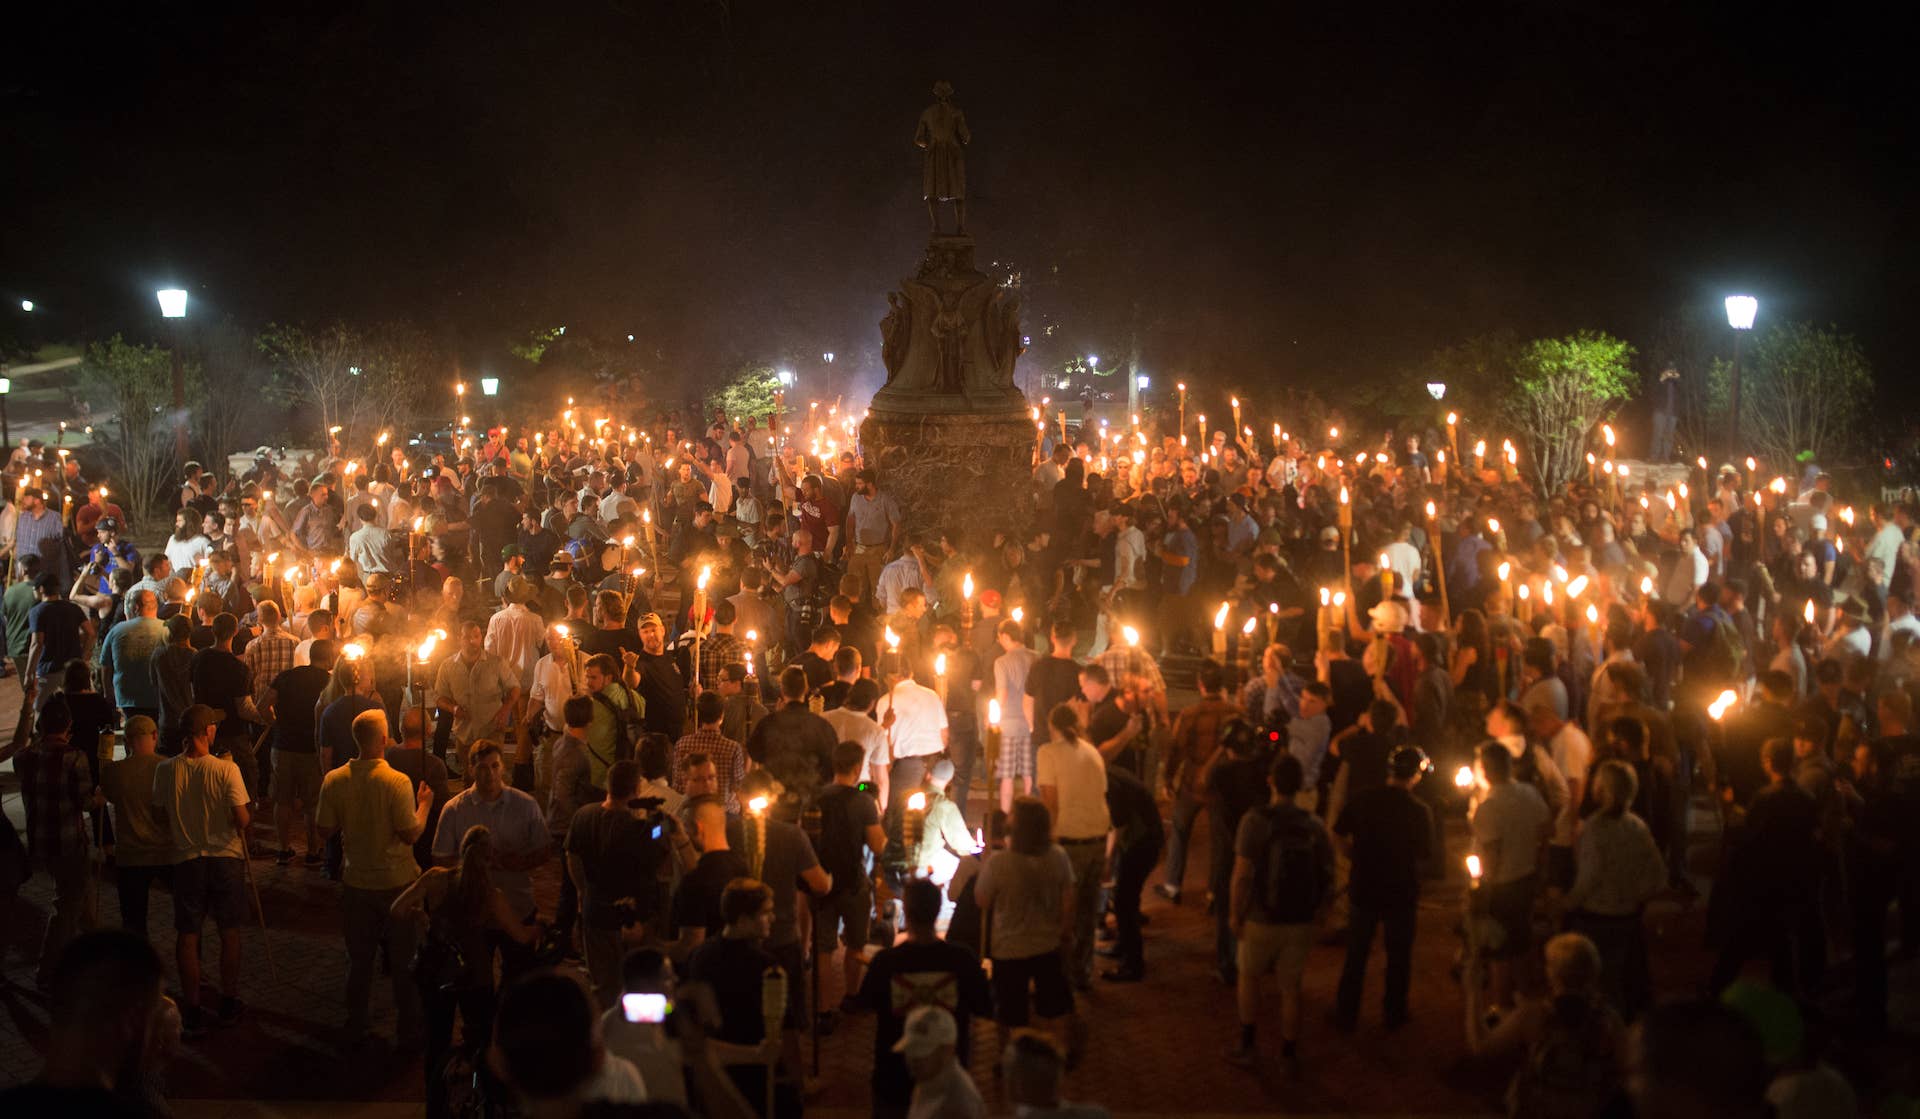 white supremacists in virginia assembling